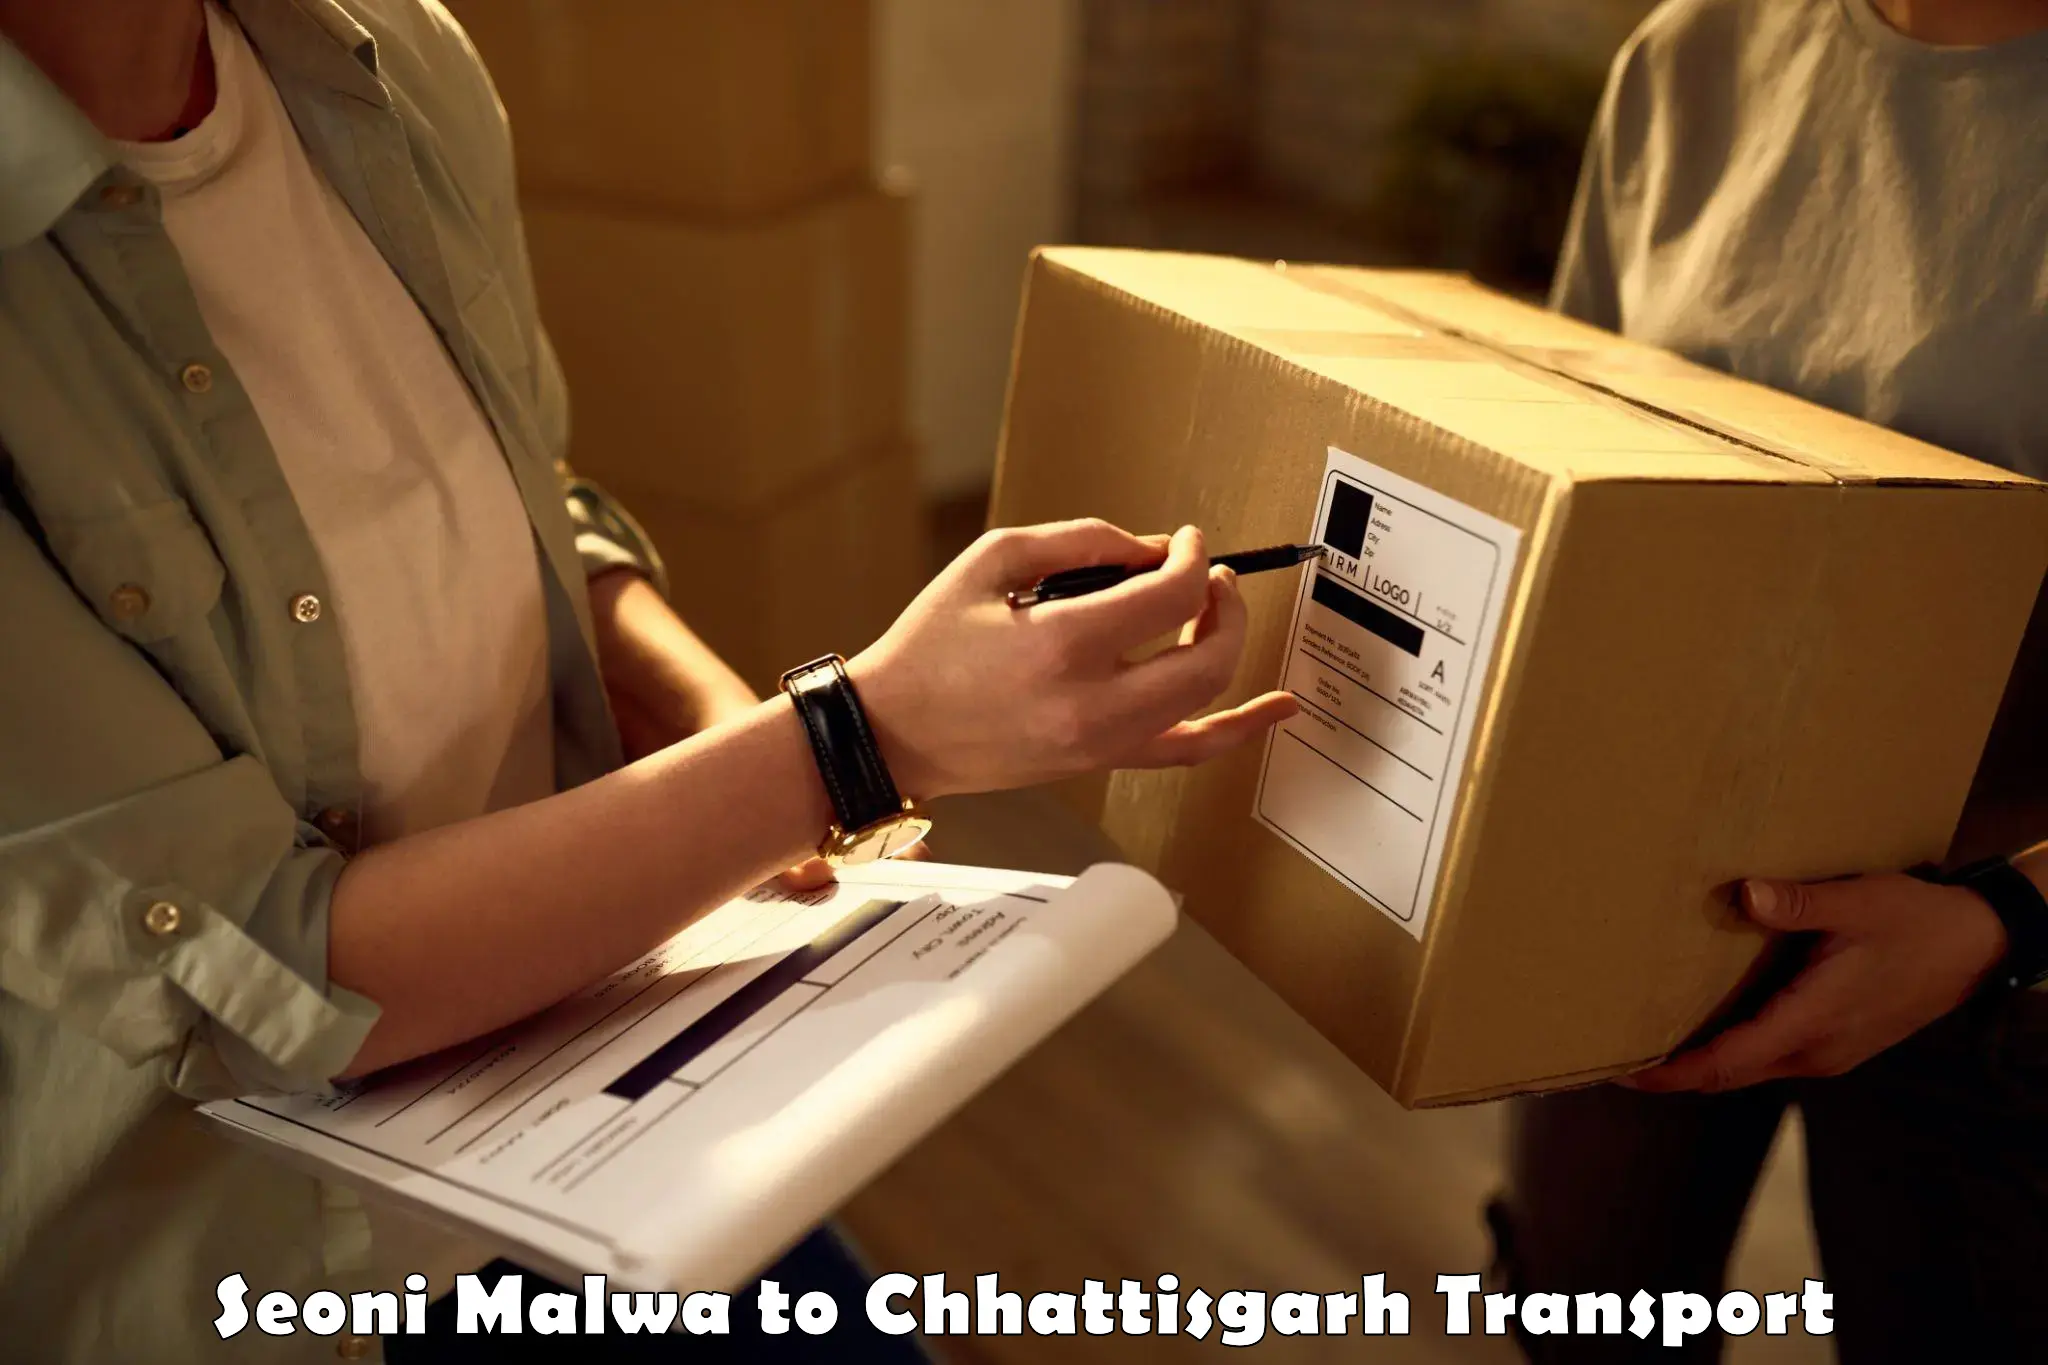 Air freight transport services Seoni Malwa to bagbahra